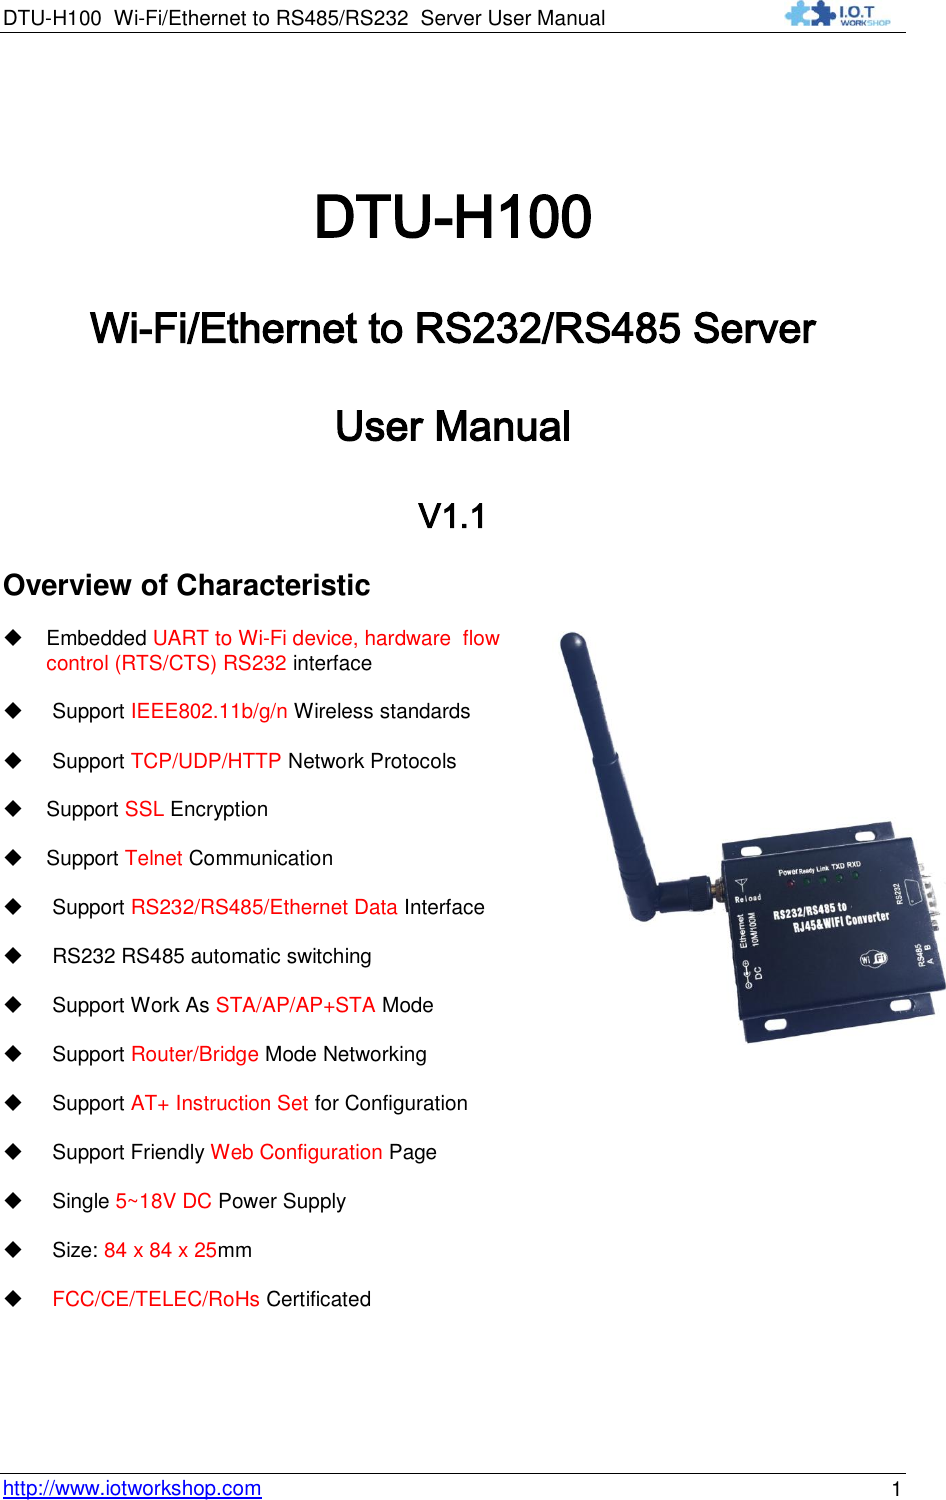 DTU-H100 Wi-Fi/Ethernet to RS485/RS232  Server User Manual    http://www.iotworkshop.com 1  DTU-H100 Wi-Fi/Ethernet to RS232/RS485 Server User Manual V1.1 Overview of Characteristic  Embedded UART to Wi-Fi device, hardware  flow  control (RTS/CTS) RS232 interface    Support IEEE802.11b/g/n Wireless standards    Support TCP/UDP/HTTP Network Protocols   Support SSL Encryption  Support Telnet Communication   Support RS232/RS485/Ethernet Data Interface   RS232 RS485 automatic switching   Support Work As STA/AP/AP+STA Mode    Support Router/Bridge Mode Networking    Support AT+ Instruction Set for Configuration    Support Friendly Web Configuration Page    Single 5~18V DC Power Supply    Size: 84 x 84 x 25mm    FCC/CE/TELEC/RoHs Certificated   